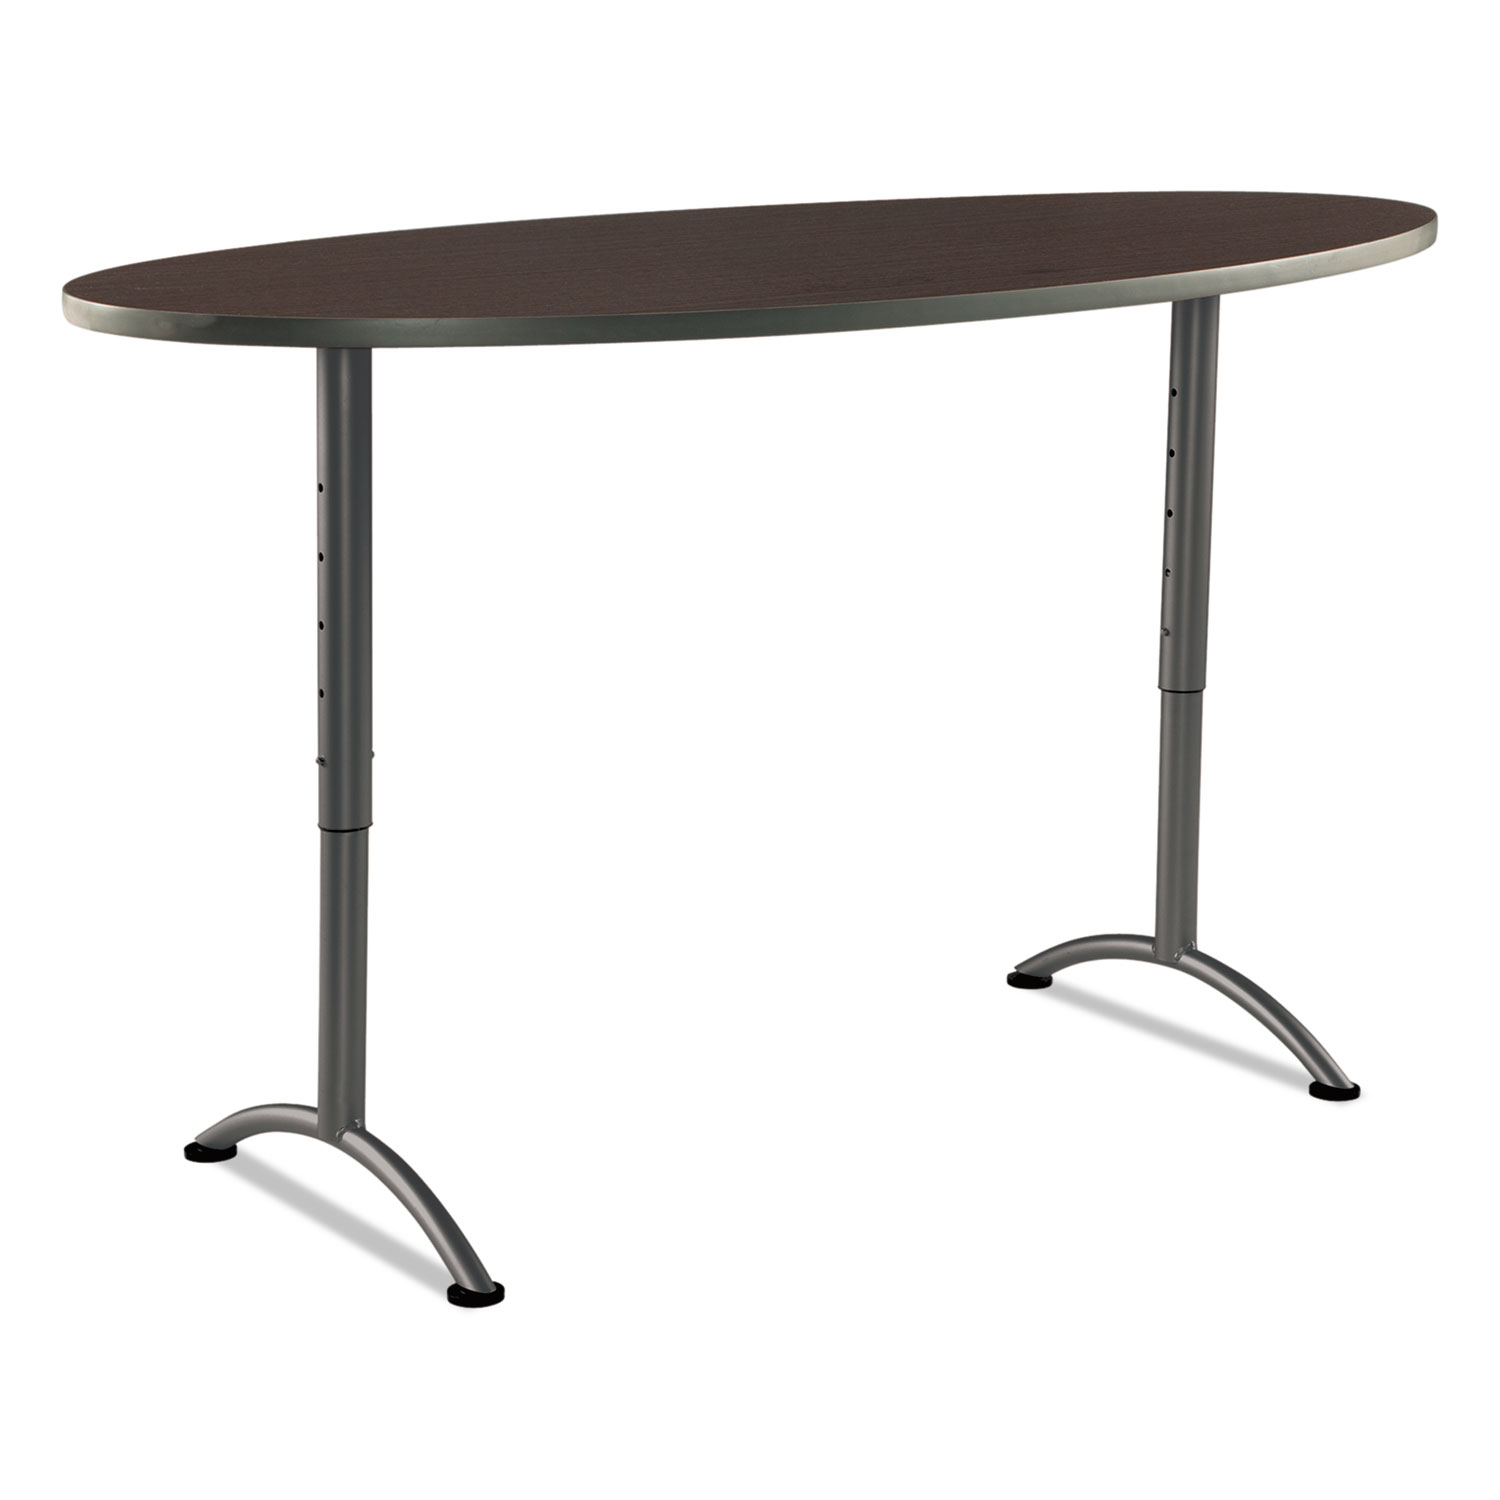 ARC Sit-to-Stand Tables, Oval Top, 36w x 72d x 30-42h, Walnut/Gray